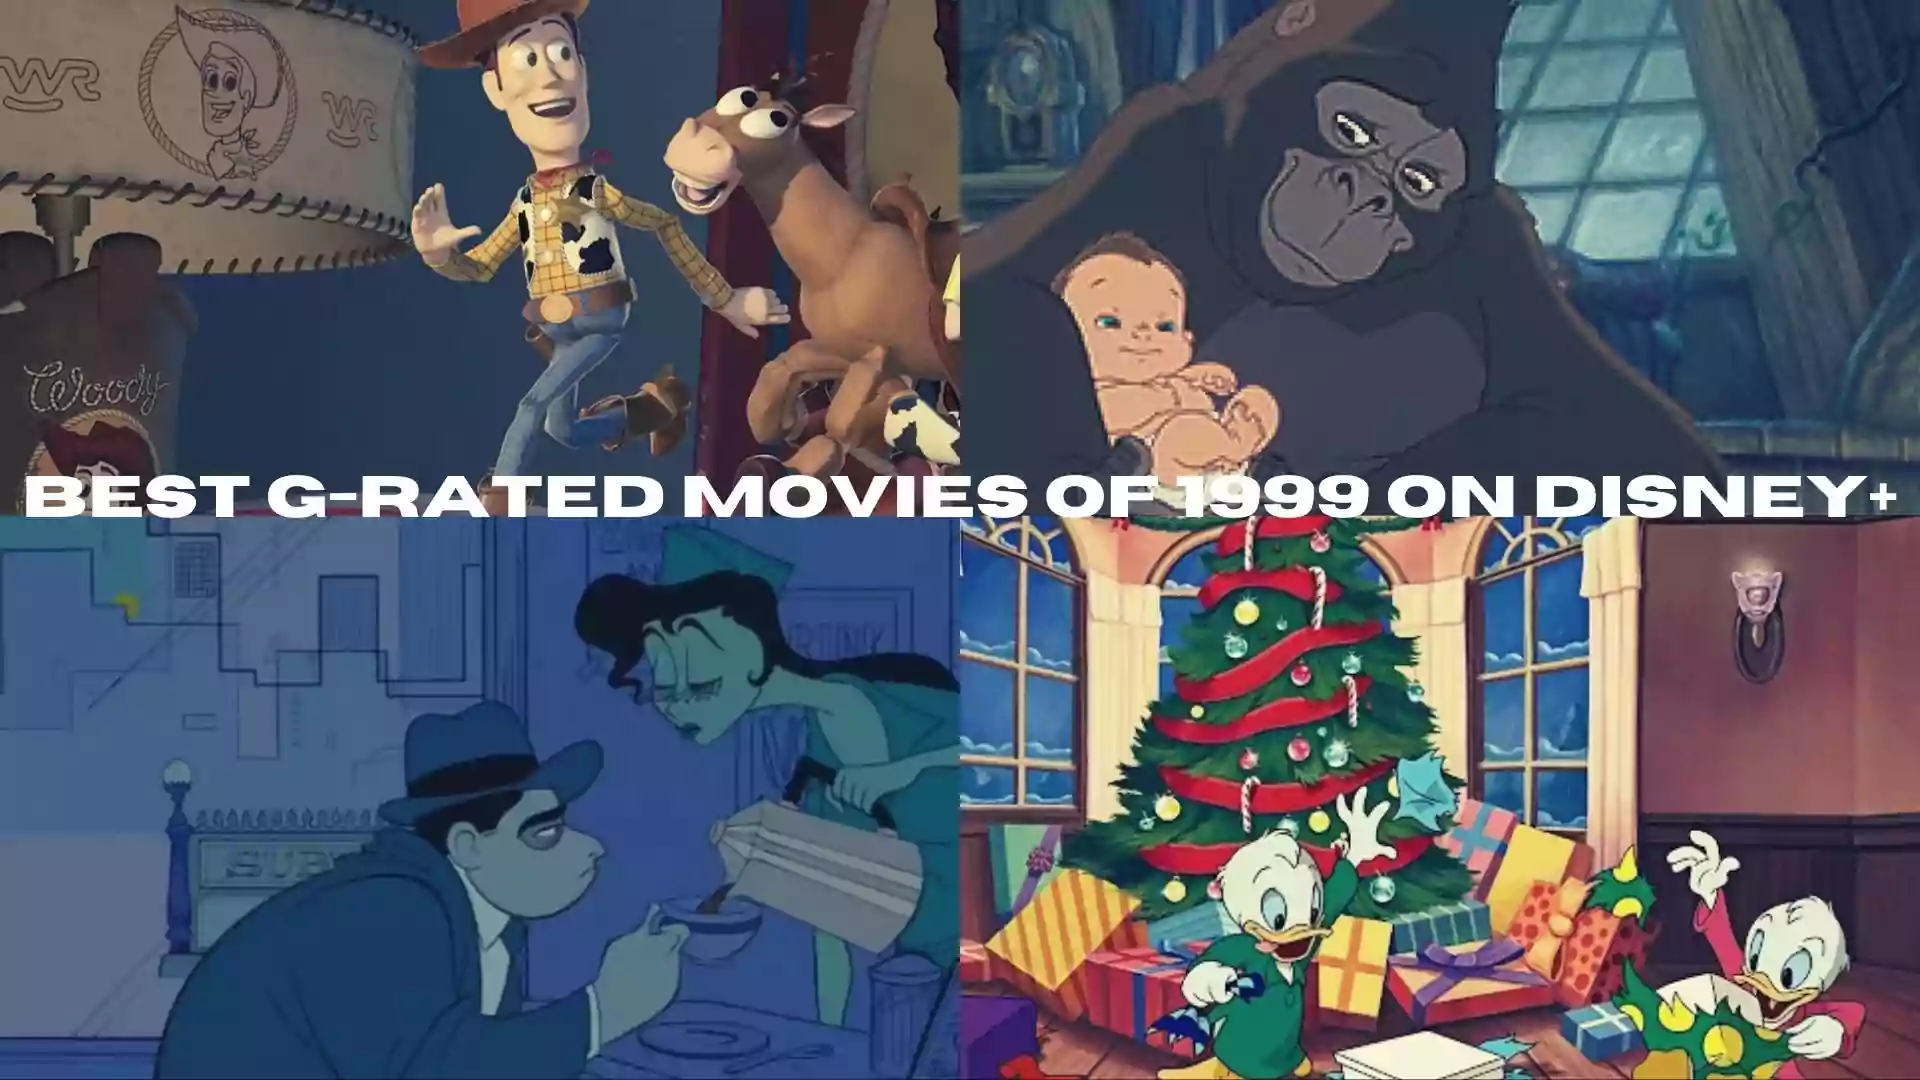 Best G-Rated Movies of 1999 on Disney+